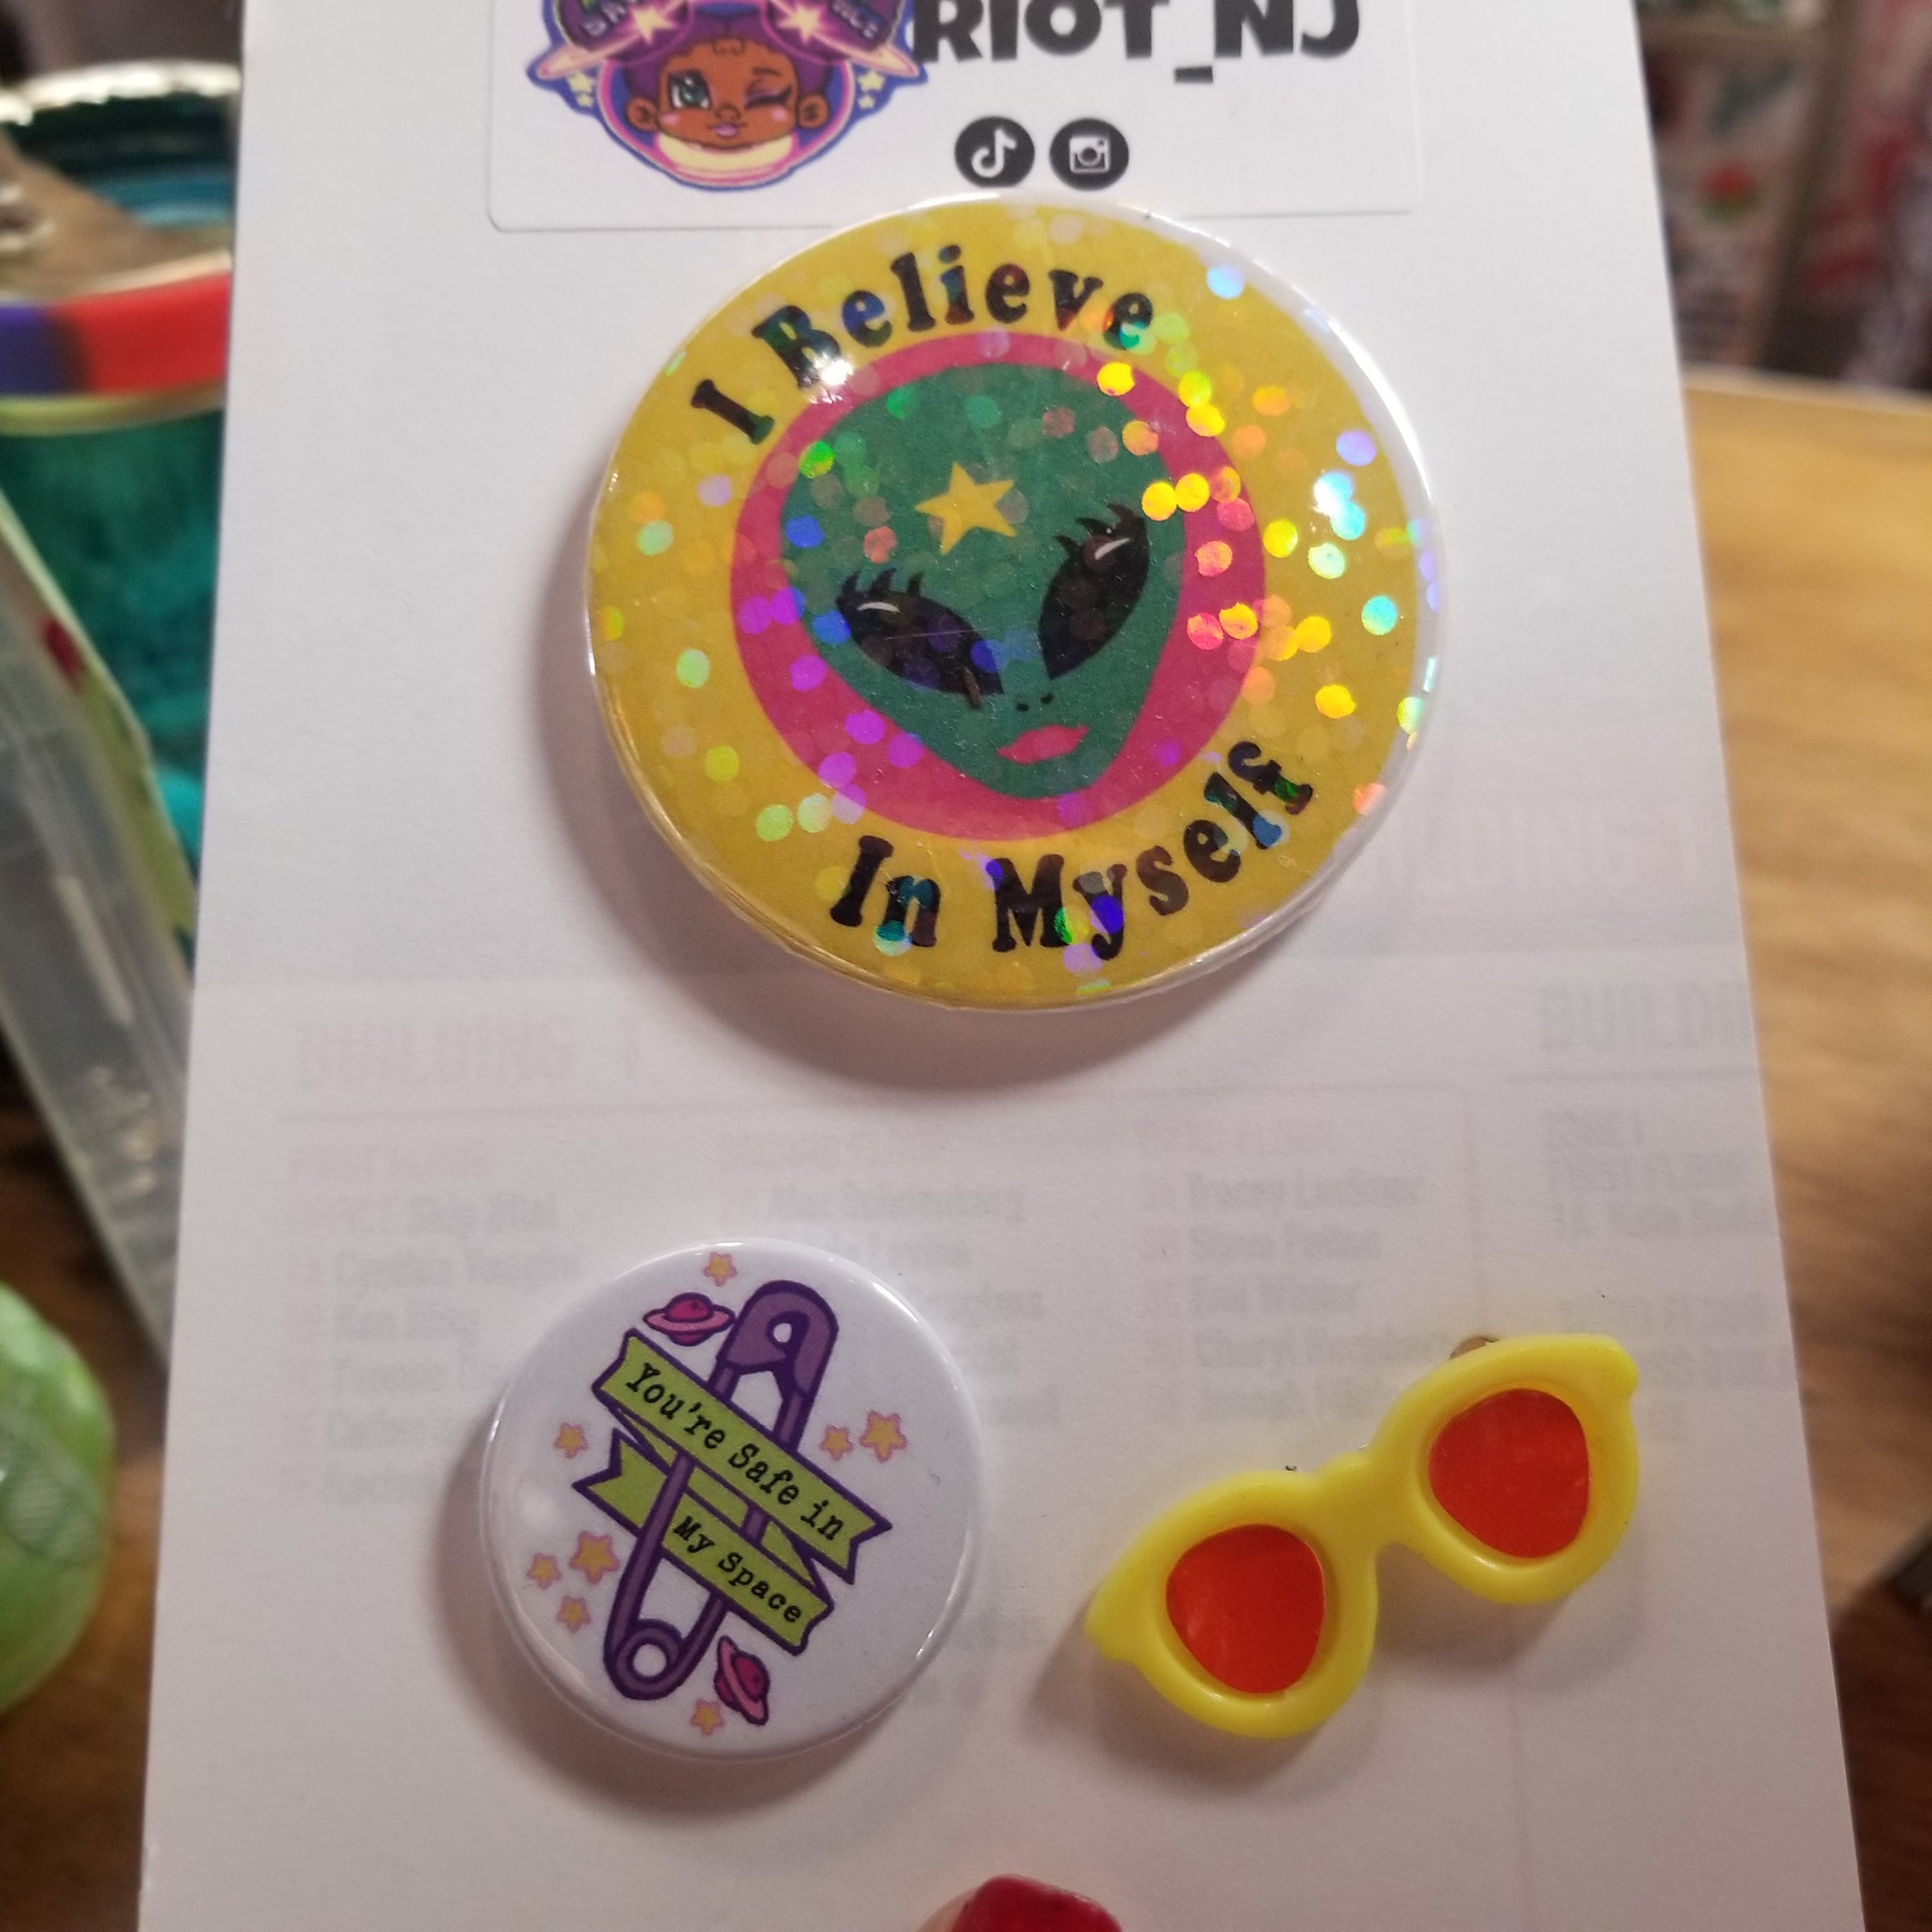 I Believe In Myself/ Sunglasses PIN PACK by Riot NJ